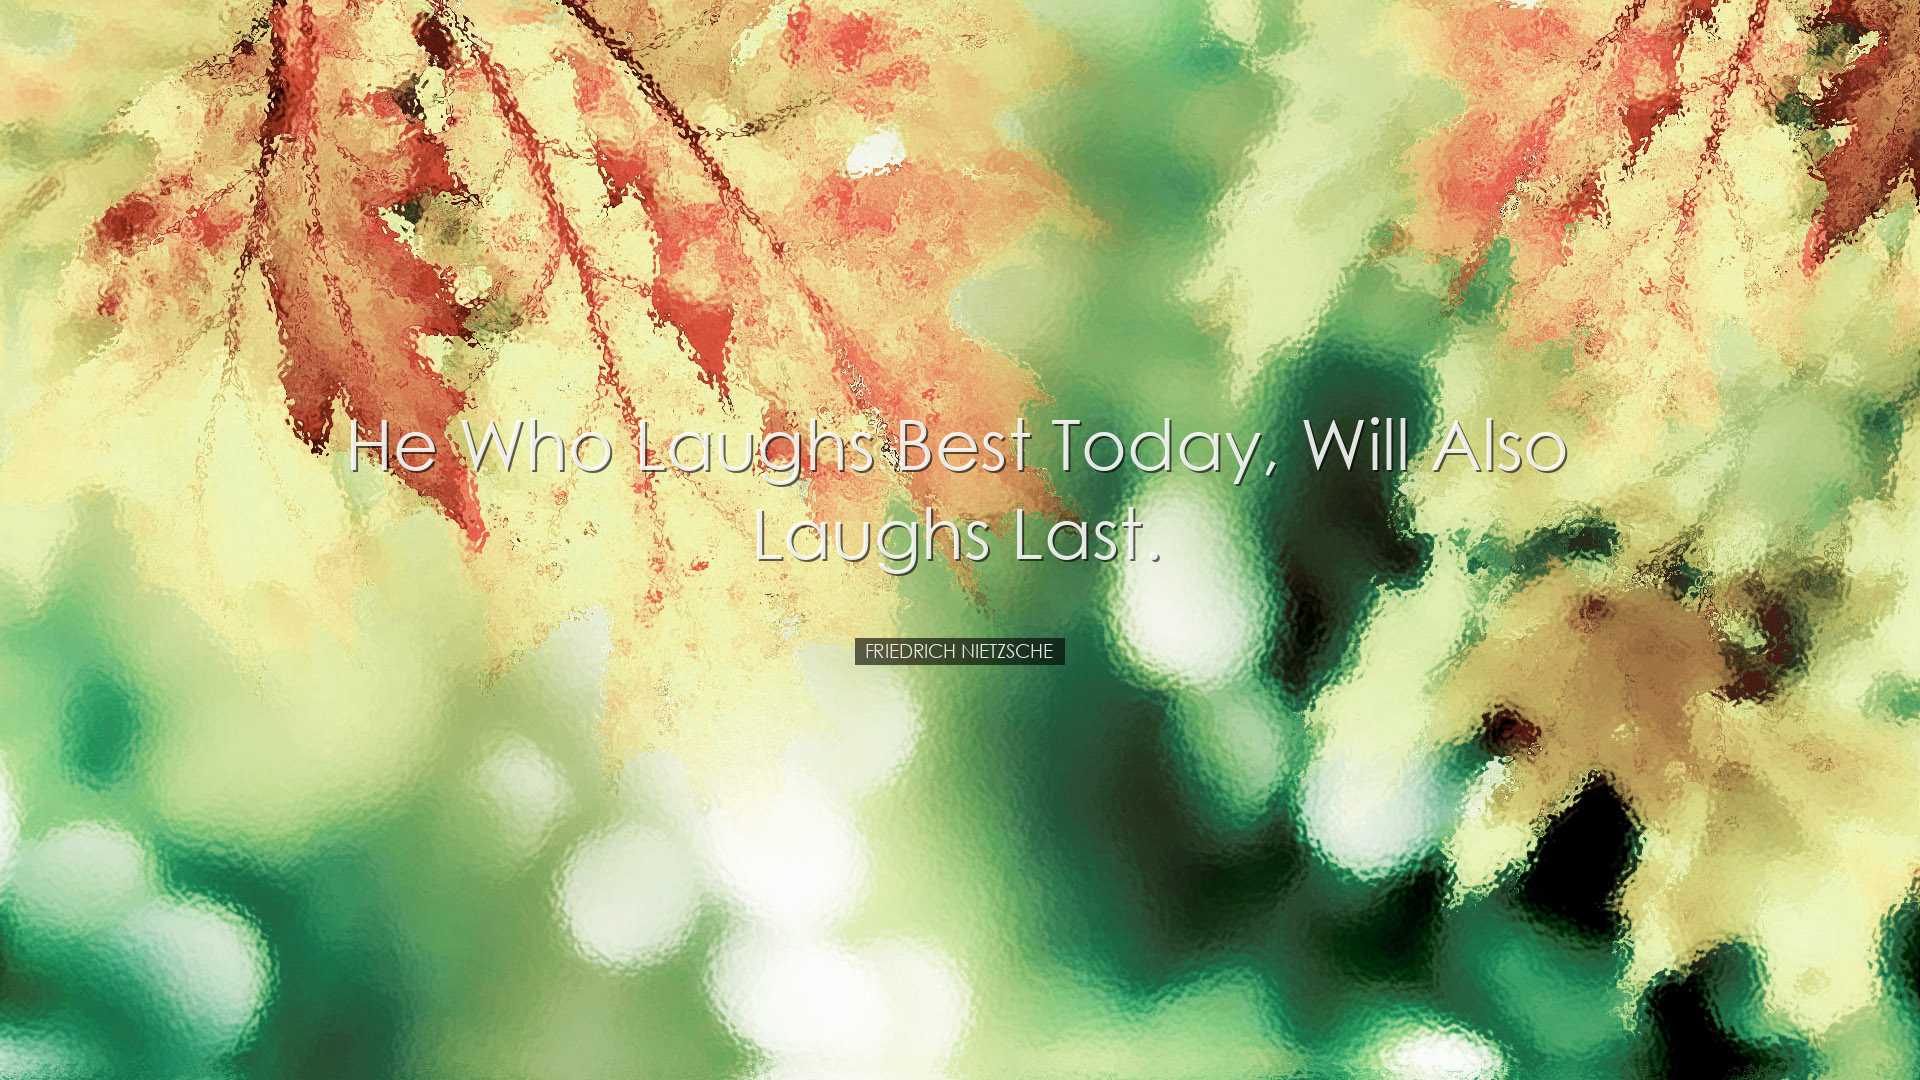 He who laughs best today, will also laughs last. - Friedrich Nietz